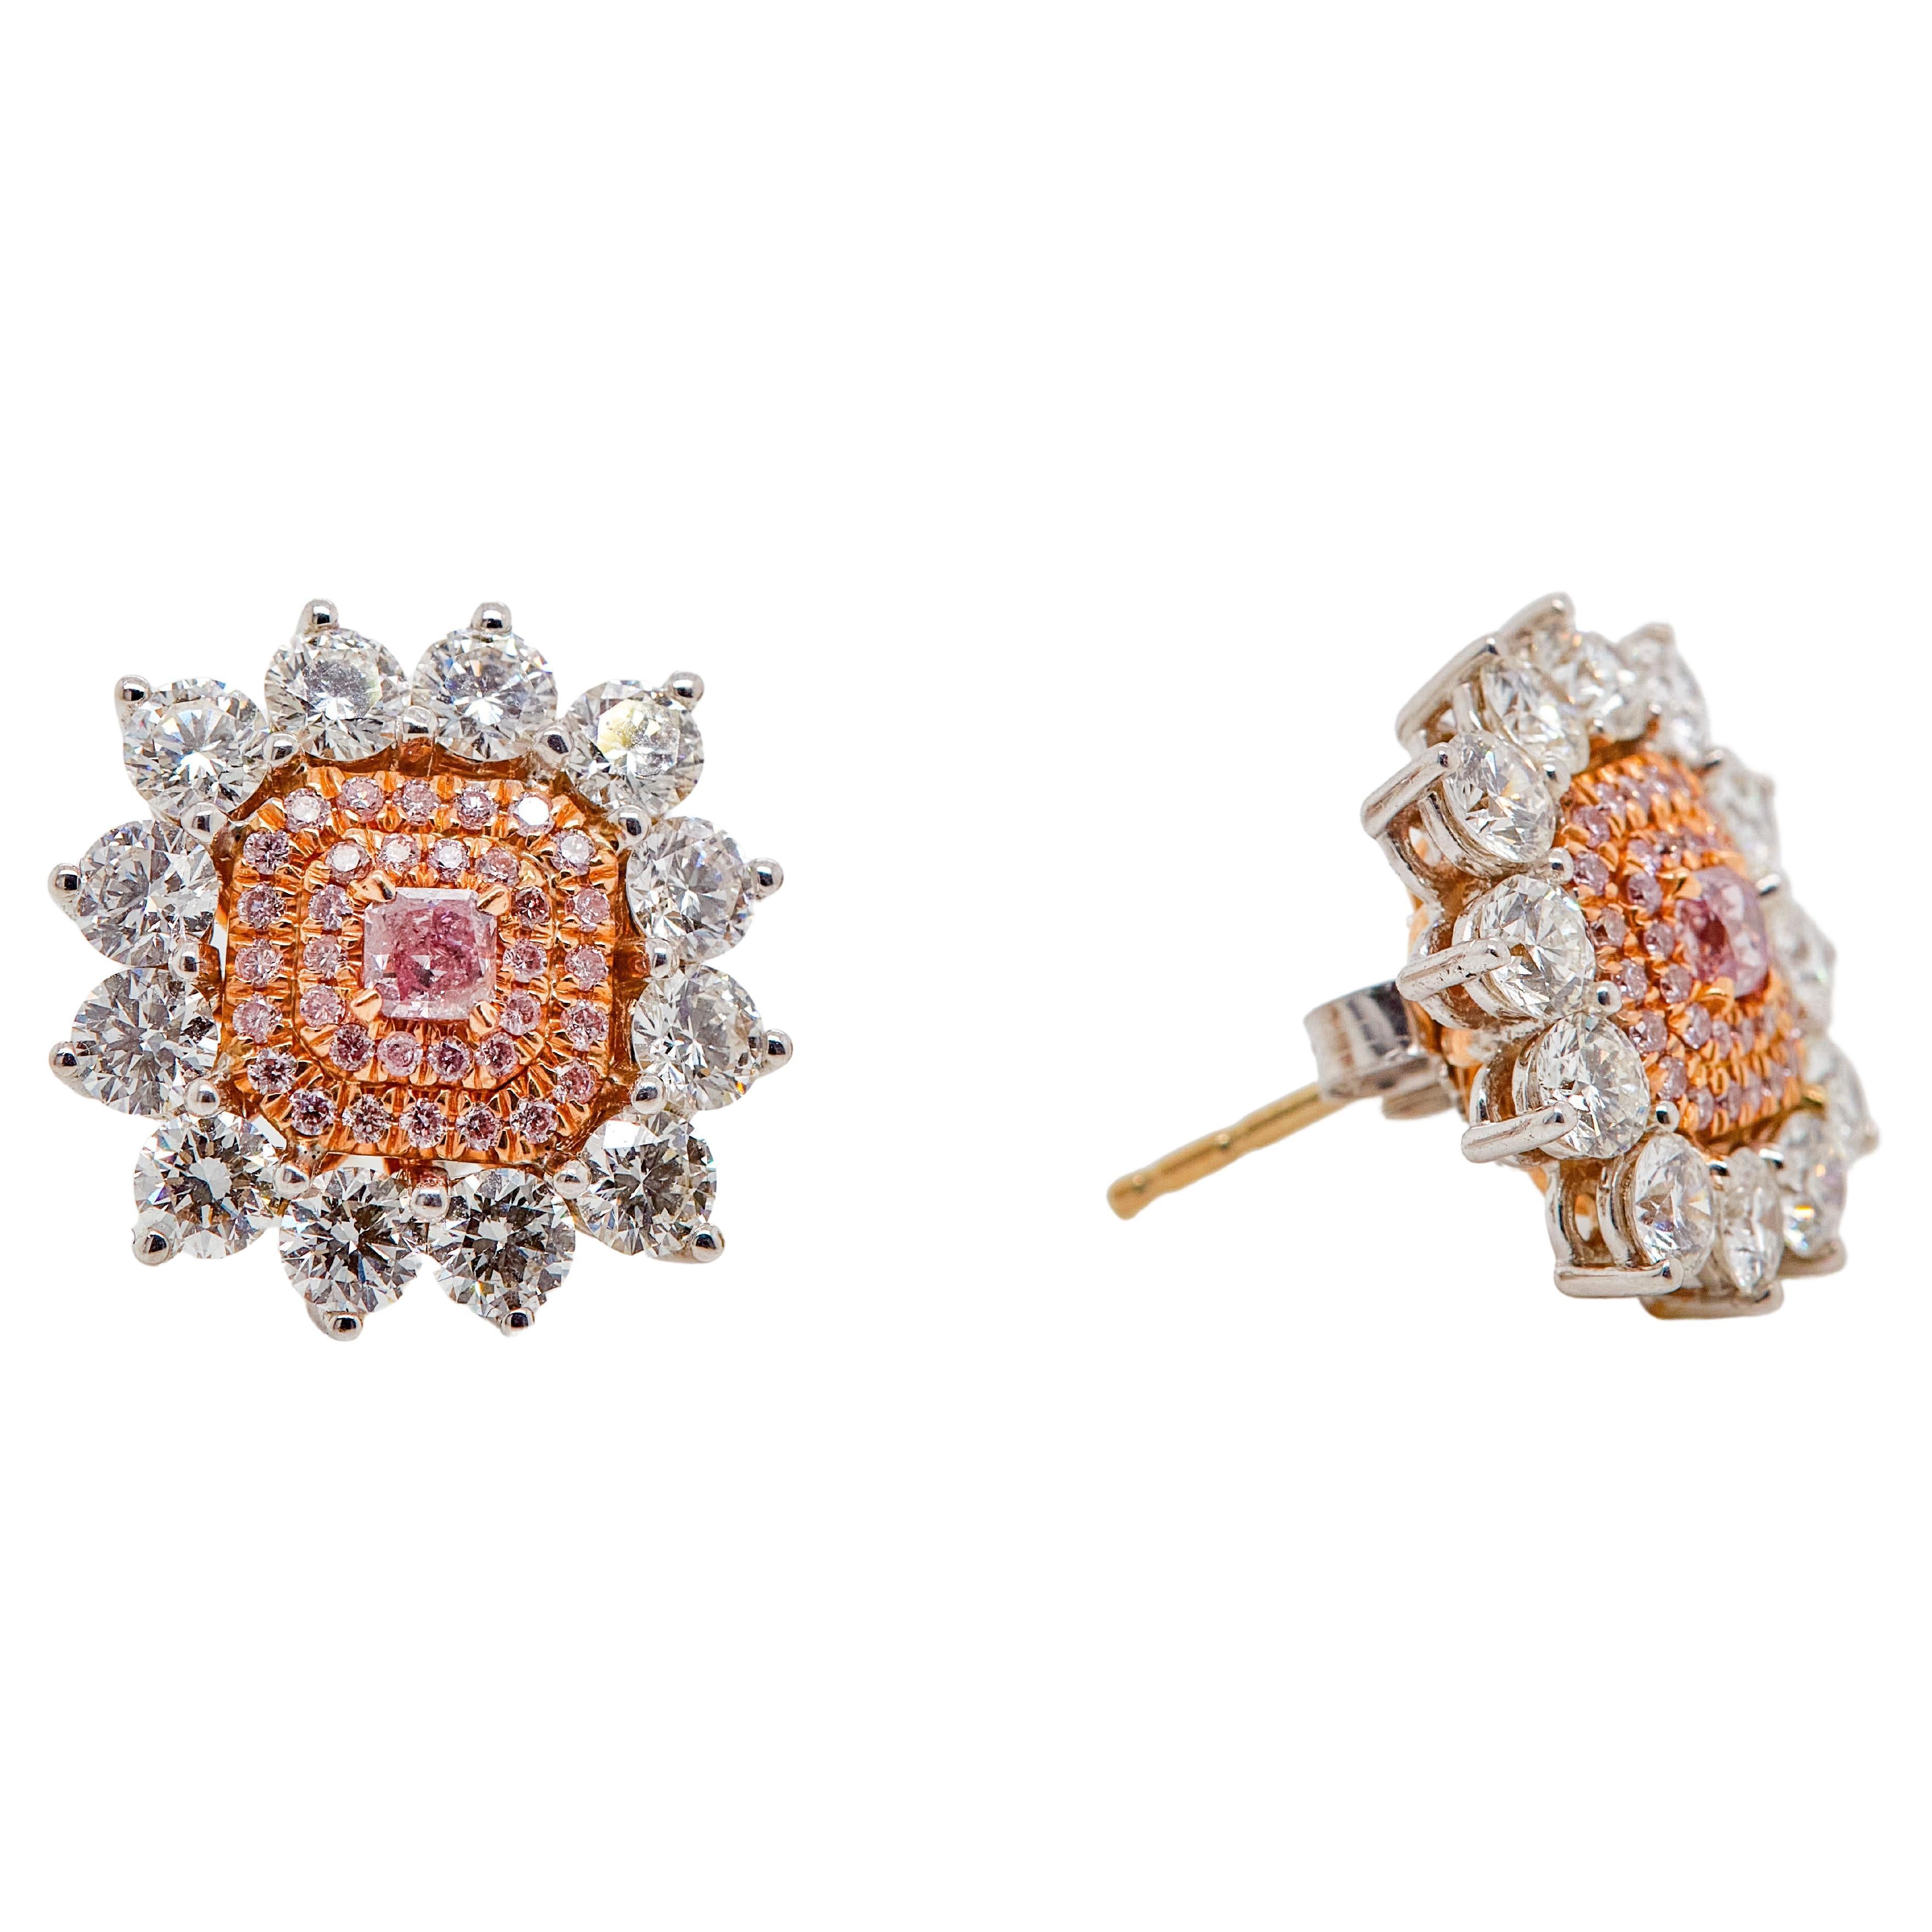 Novel Collection showcasing a pair of 0.31 Carat Fancy Intense Pink Diamond Stud Earrings. GIA Certified as Cut-Cornered Square. Set with 24 round-cut white diamonds totaling in 3.28 carat and 72 Pink diamonds totaling in 0.43 carat. Set in a